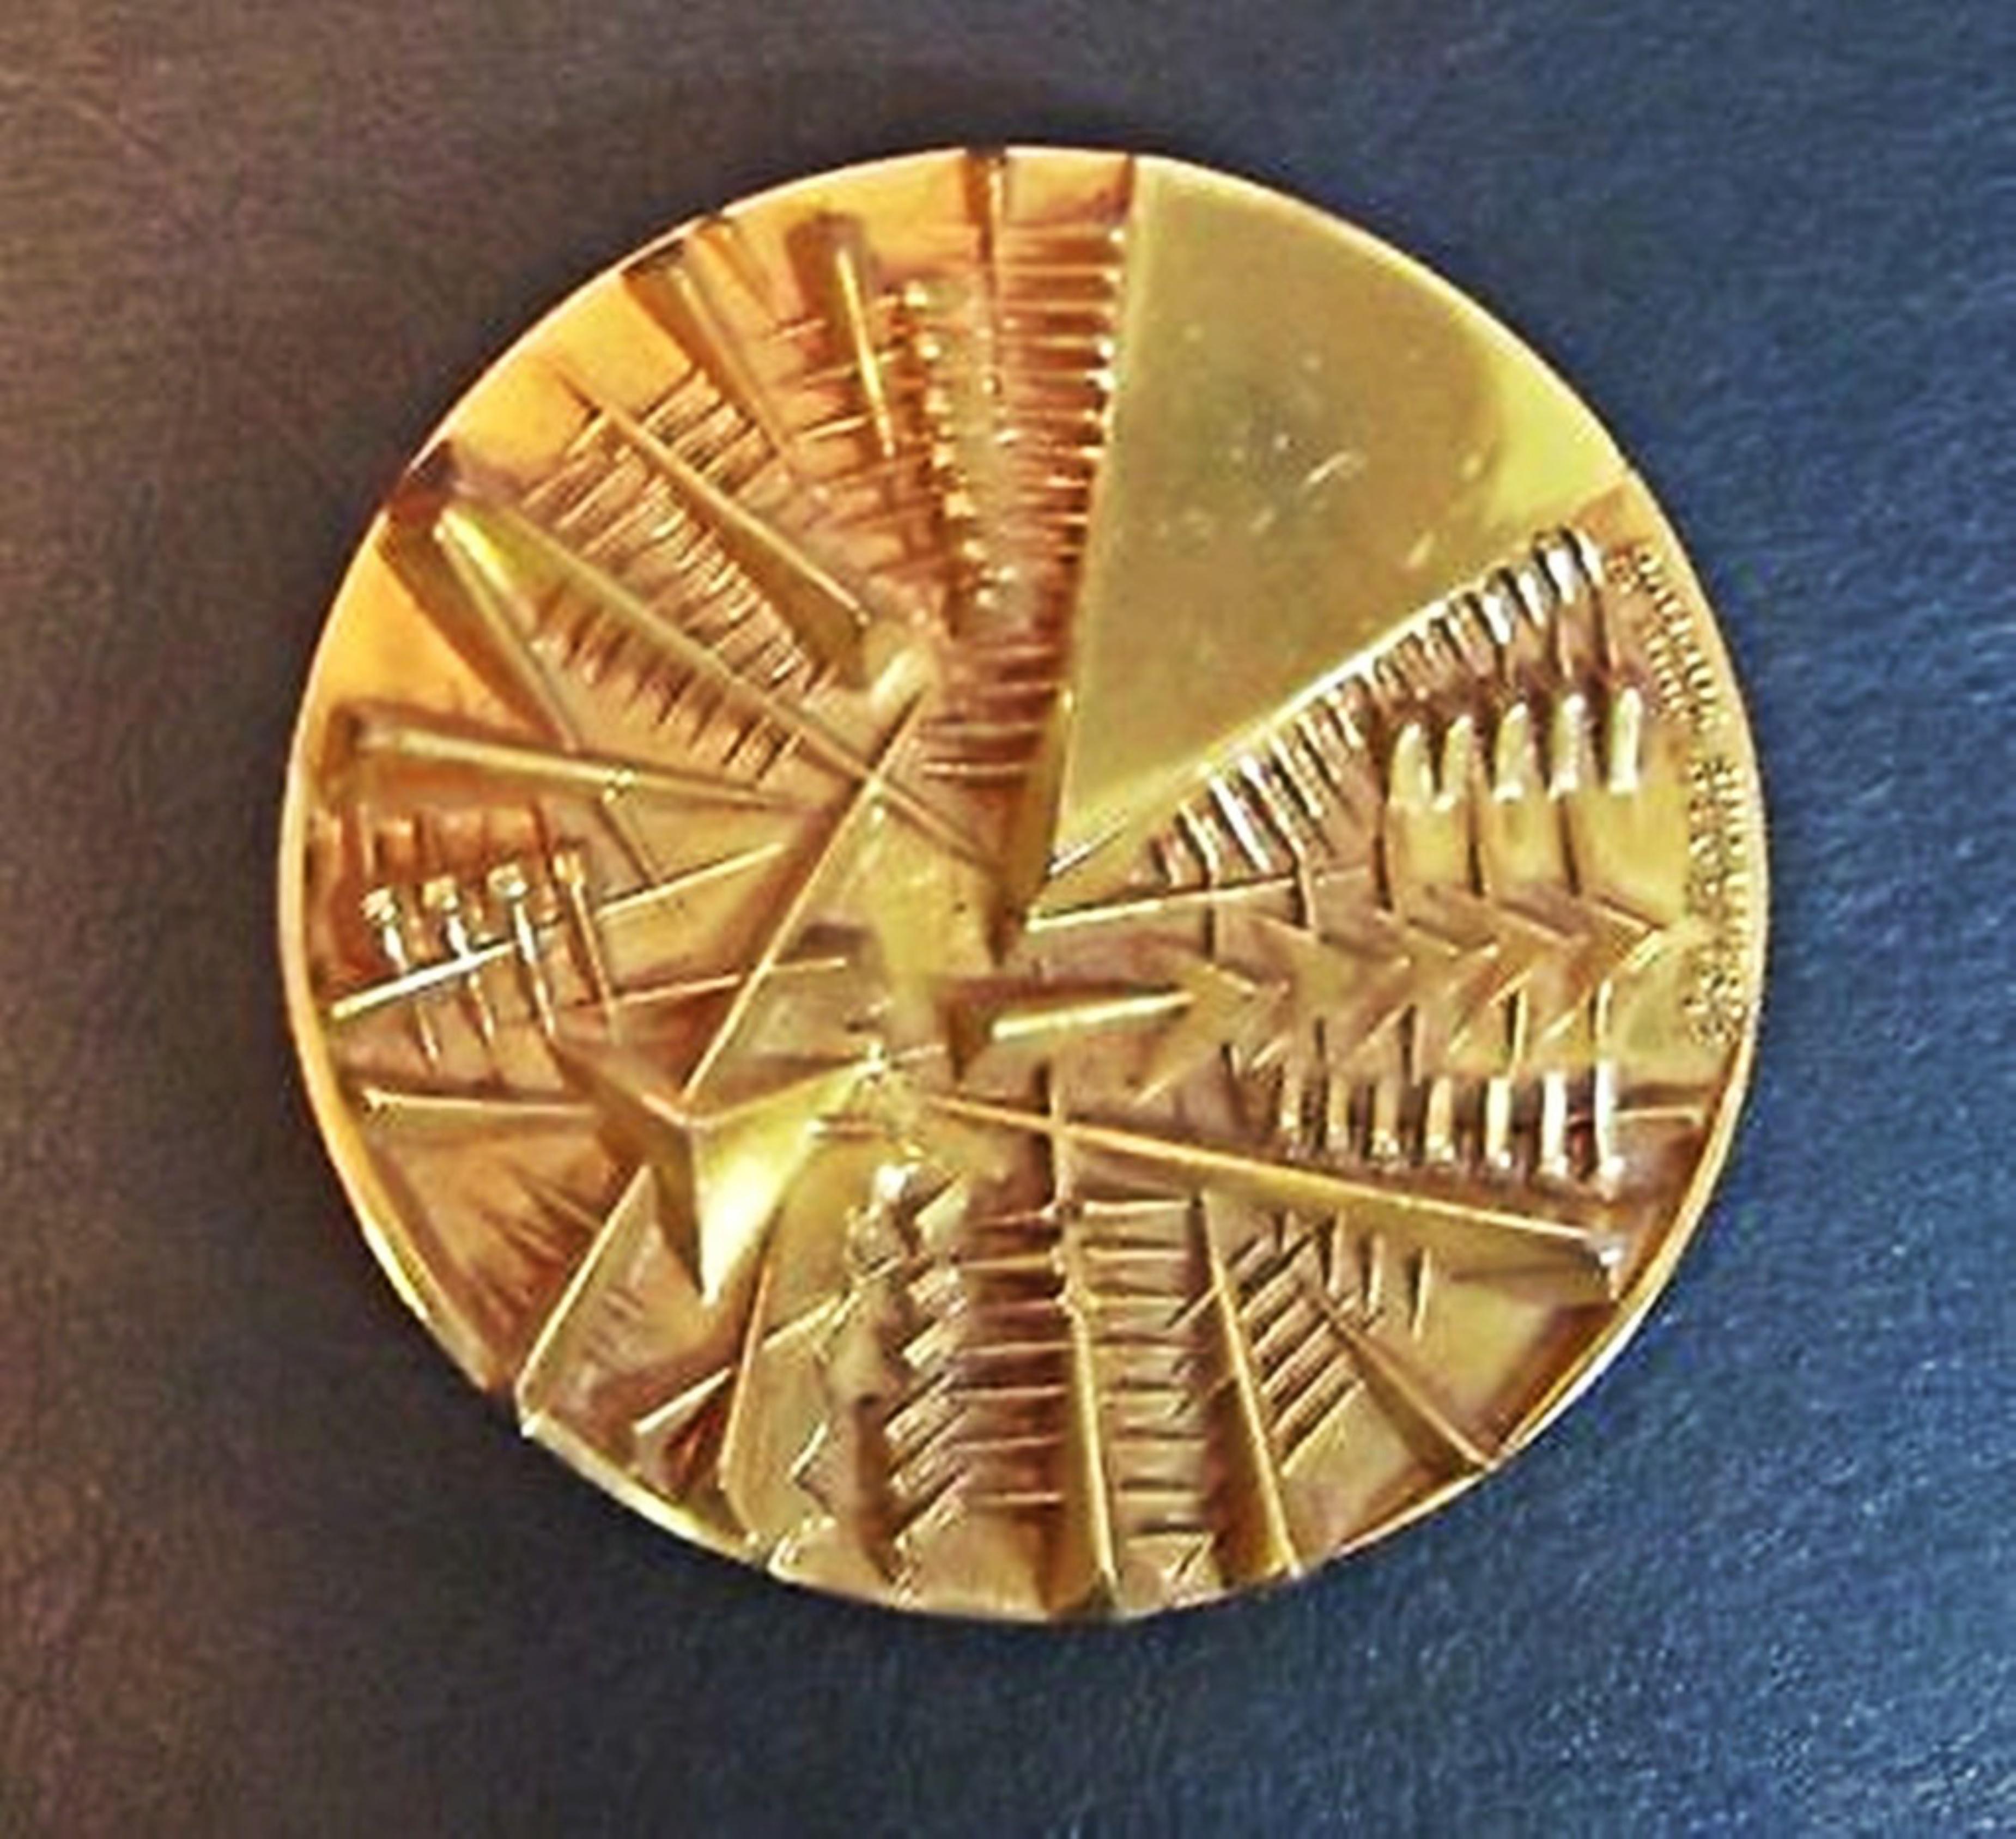 ARNALDO POMODORO
Double Sided Gold Plated Medallion, 1985
Bronze with Gold Patina
2 7/10 × 2 7/10 × 3/10 inches
Limited Edition of 500
Signed by artist with incised signature; Stamped by Johnson Foundry 
This dazzling two sided limited edition